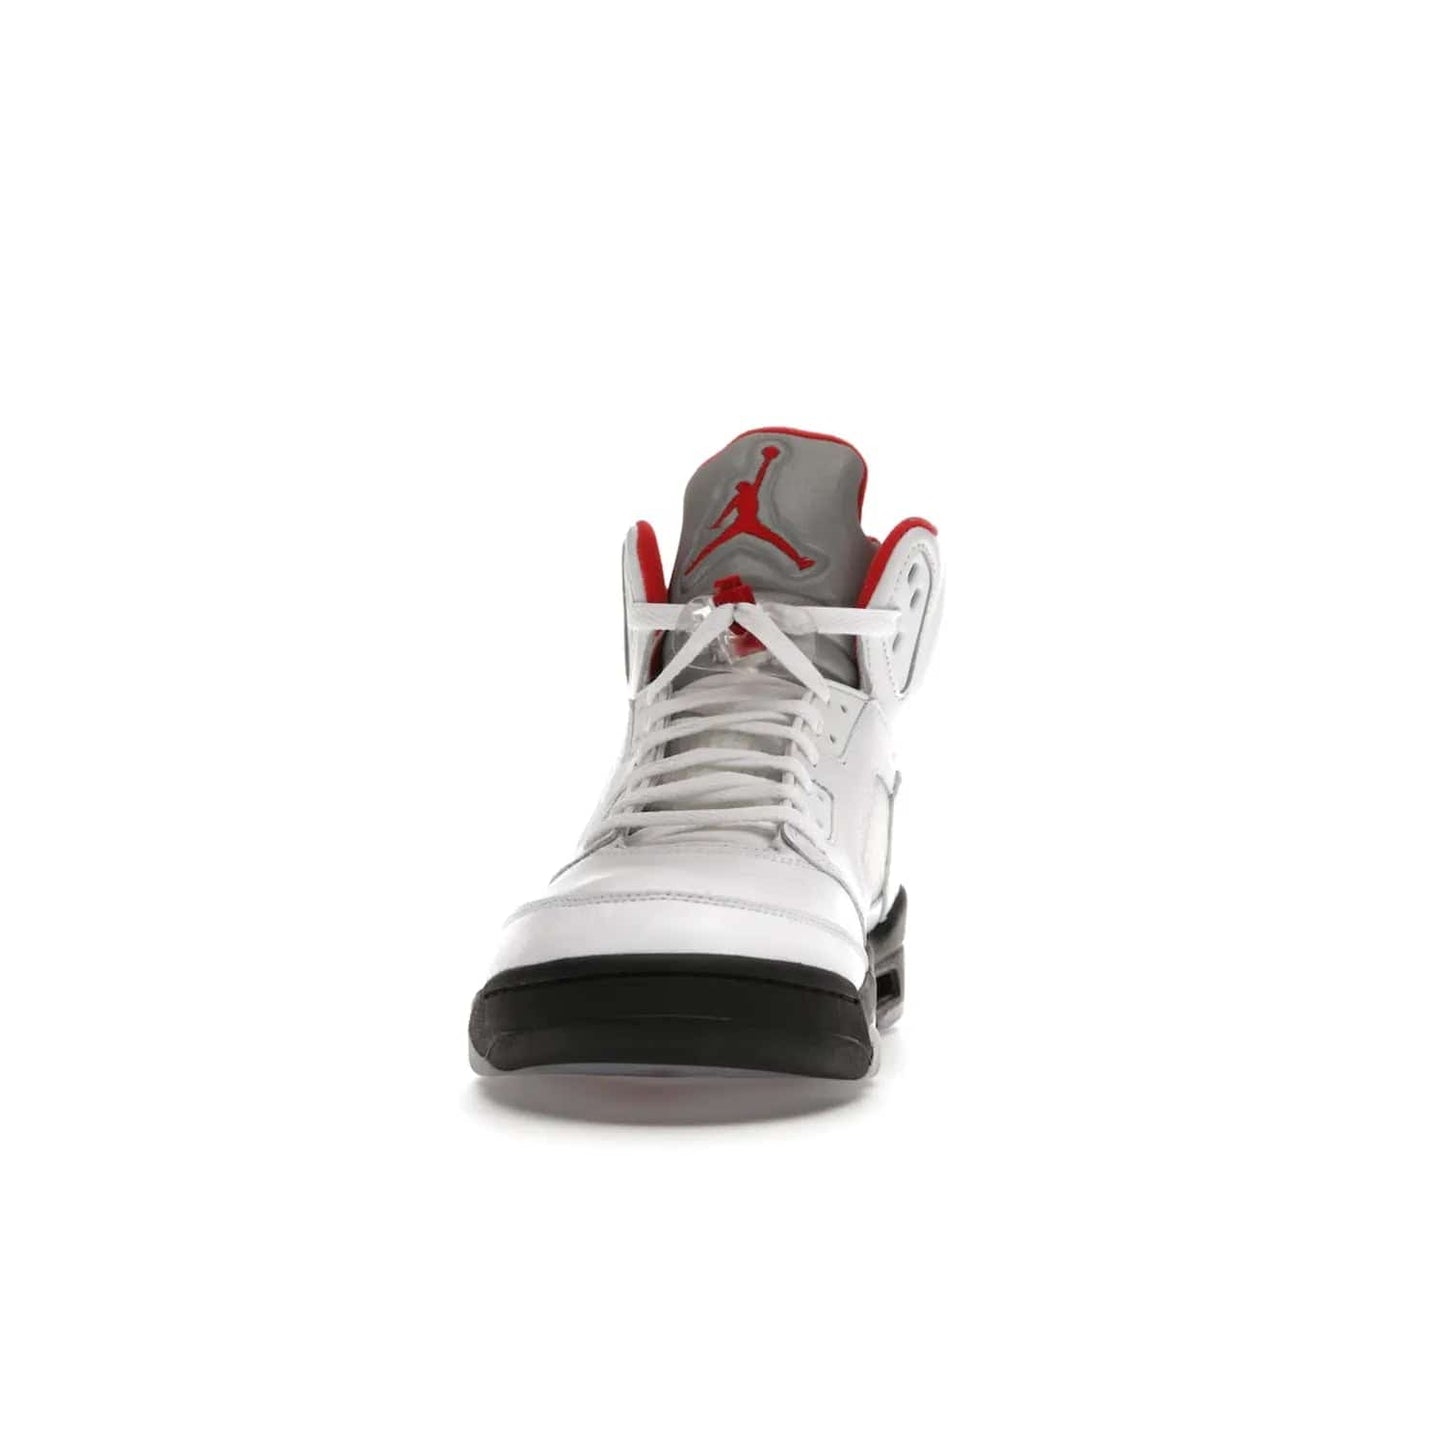 Jordan 5 Retro Fire Red Silver Tongue (2020) - Image 11 - Only at www.BallersClubKickz.com - Experience classic styling with the Jordan 5 Retro Fire Red Silver Tongue (2020). Features a white leather upper, 3M reflective tongue, midsole colorblocking, and an icy translucent outsole. Now available, upgrade your shoe collection today.